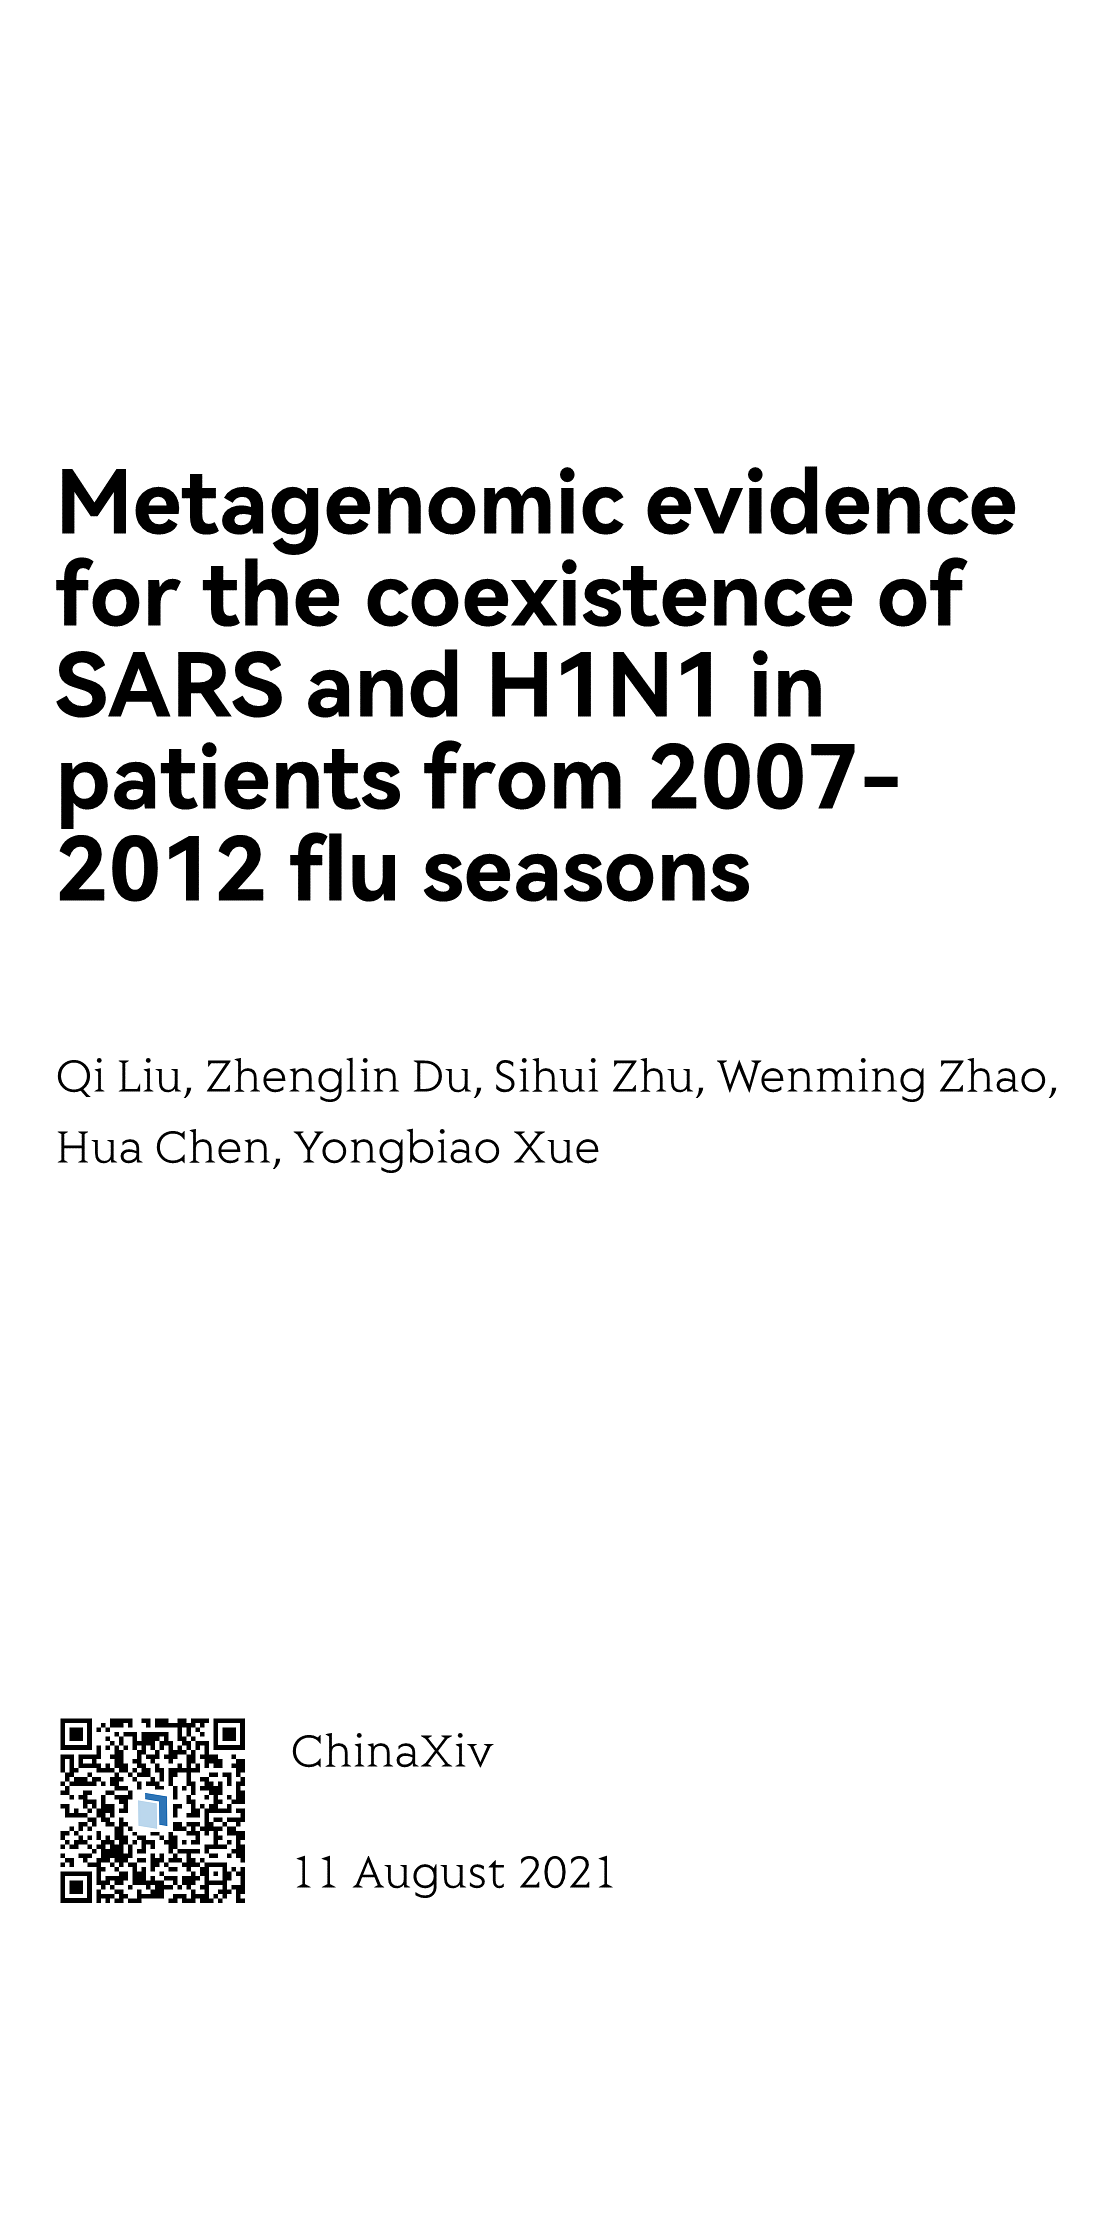 Metagenomic evidence for the coexistence of SARS and H1N1 in patients from 2007-2012 flu seasons_1